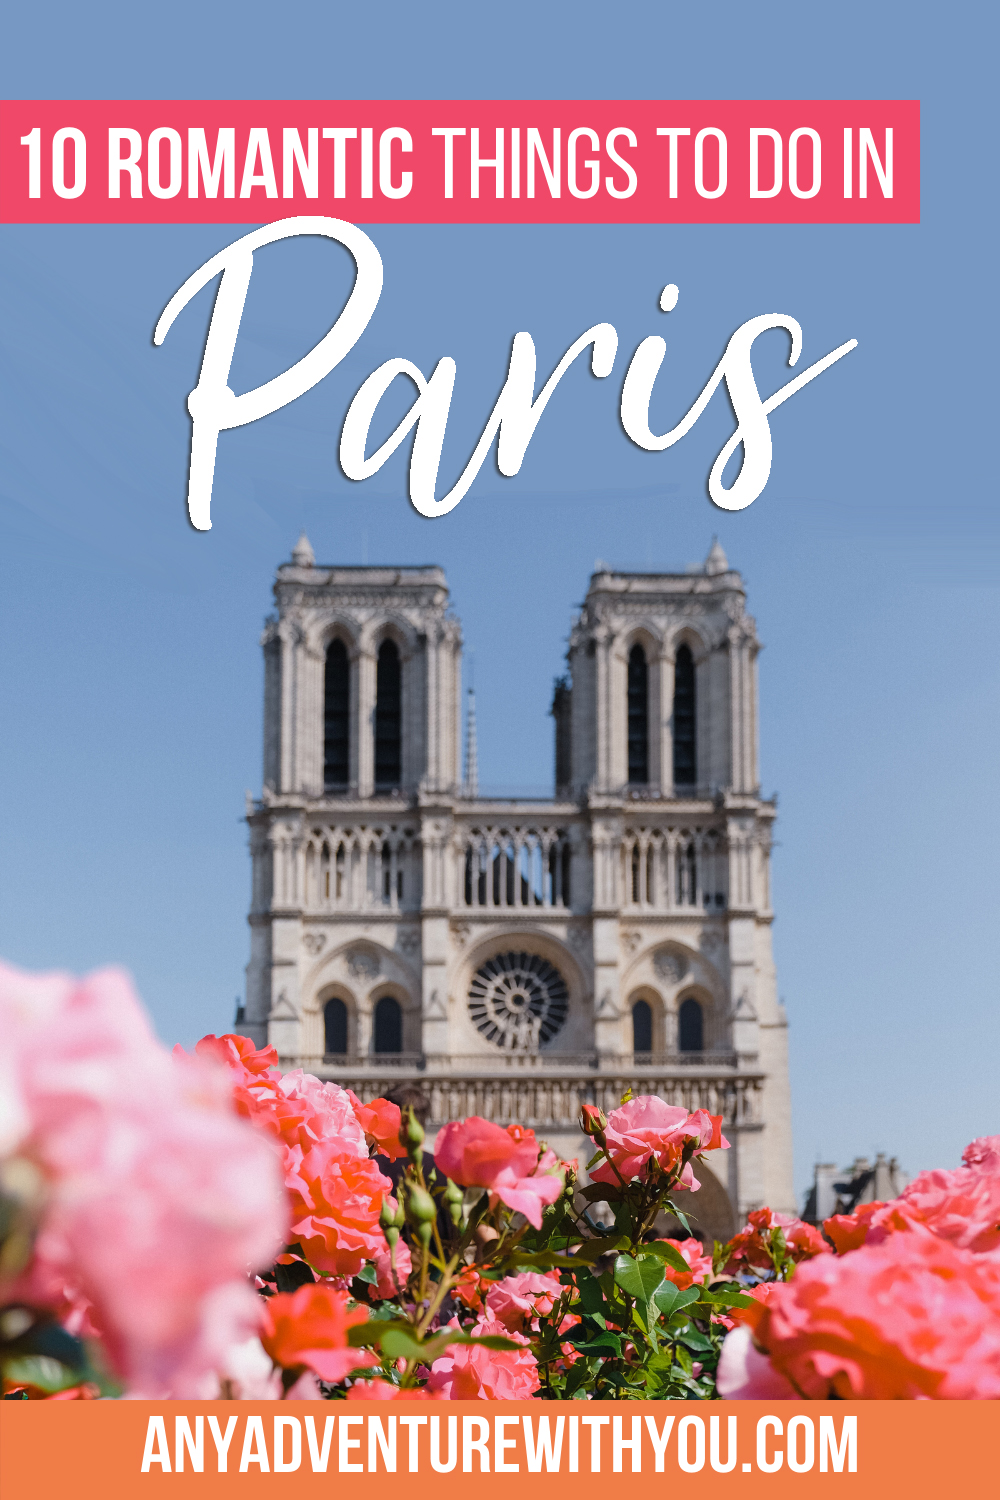 No matter what you’re looking to do, here are 10 romantic things to do in Paris. Items range from things to do in Paris for foodie couples, adventurous couples, and even those who want to just relax. #Paris #ParisBucketList #ParisTravel #RomanticParis #ParisTravelTips